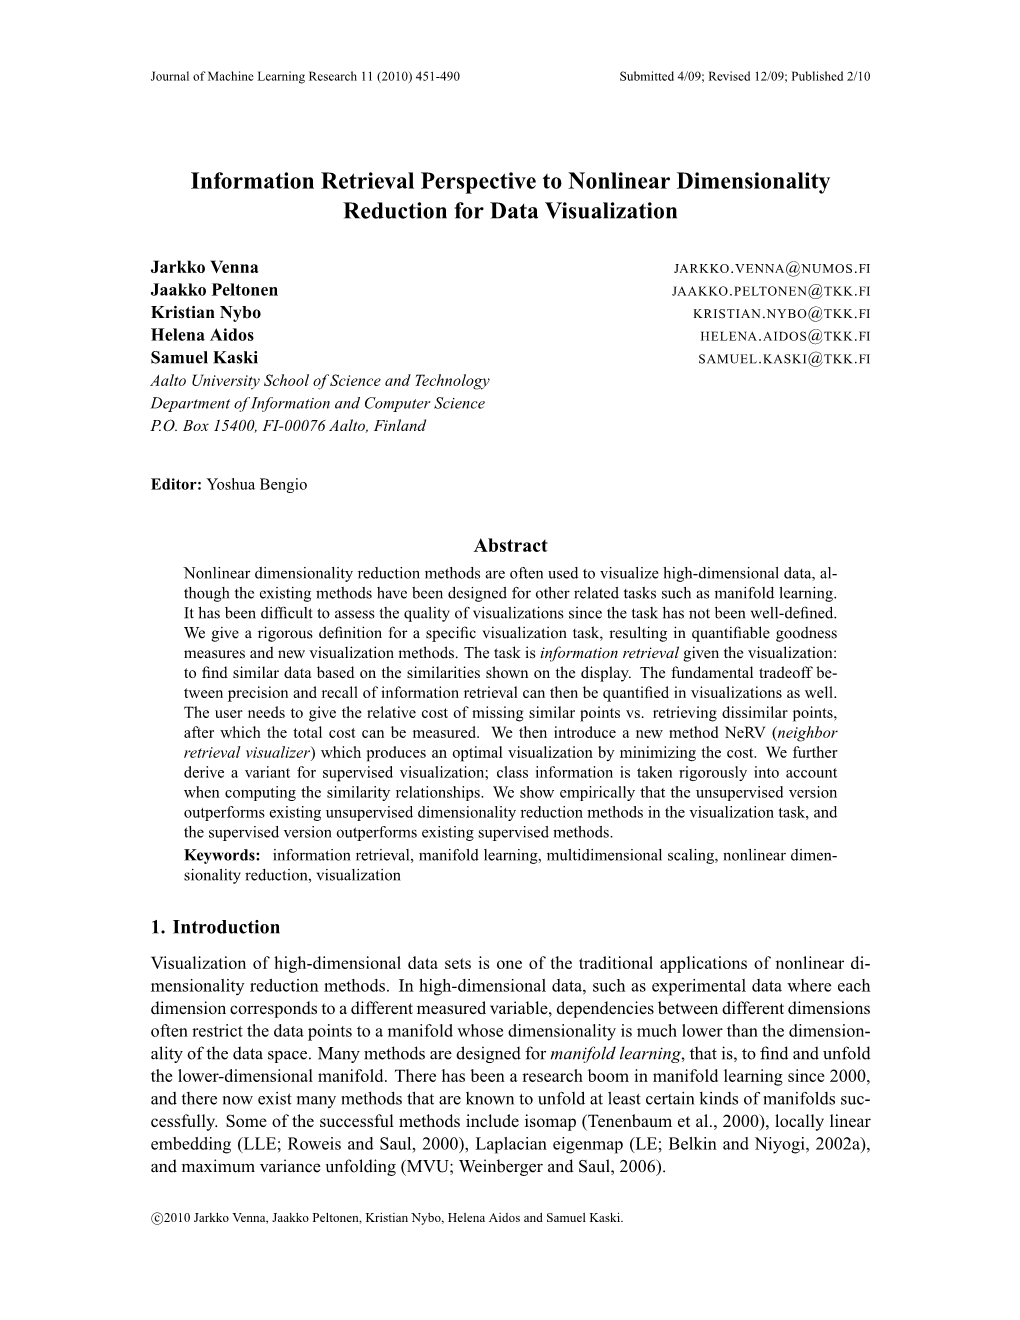 Information Retrieval Perspective to Nonlinear Dimensionality Reduction for Data Visualization